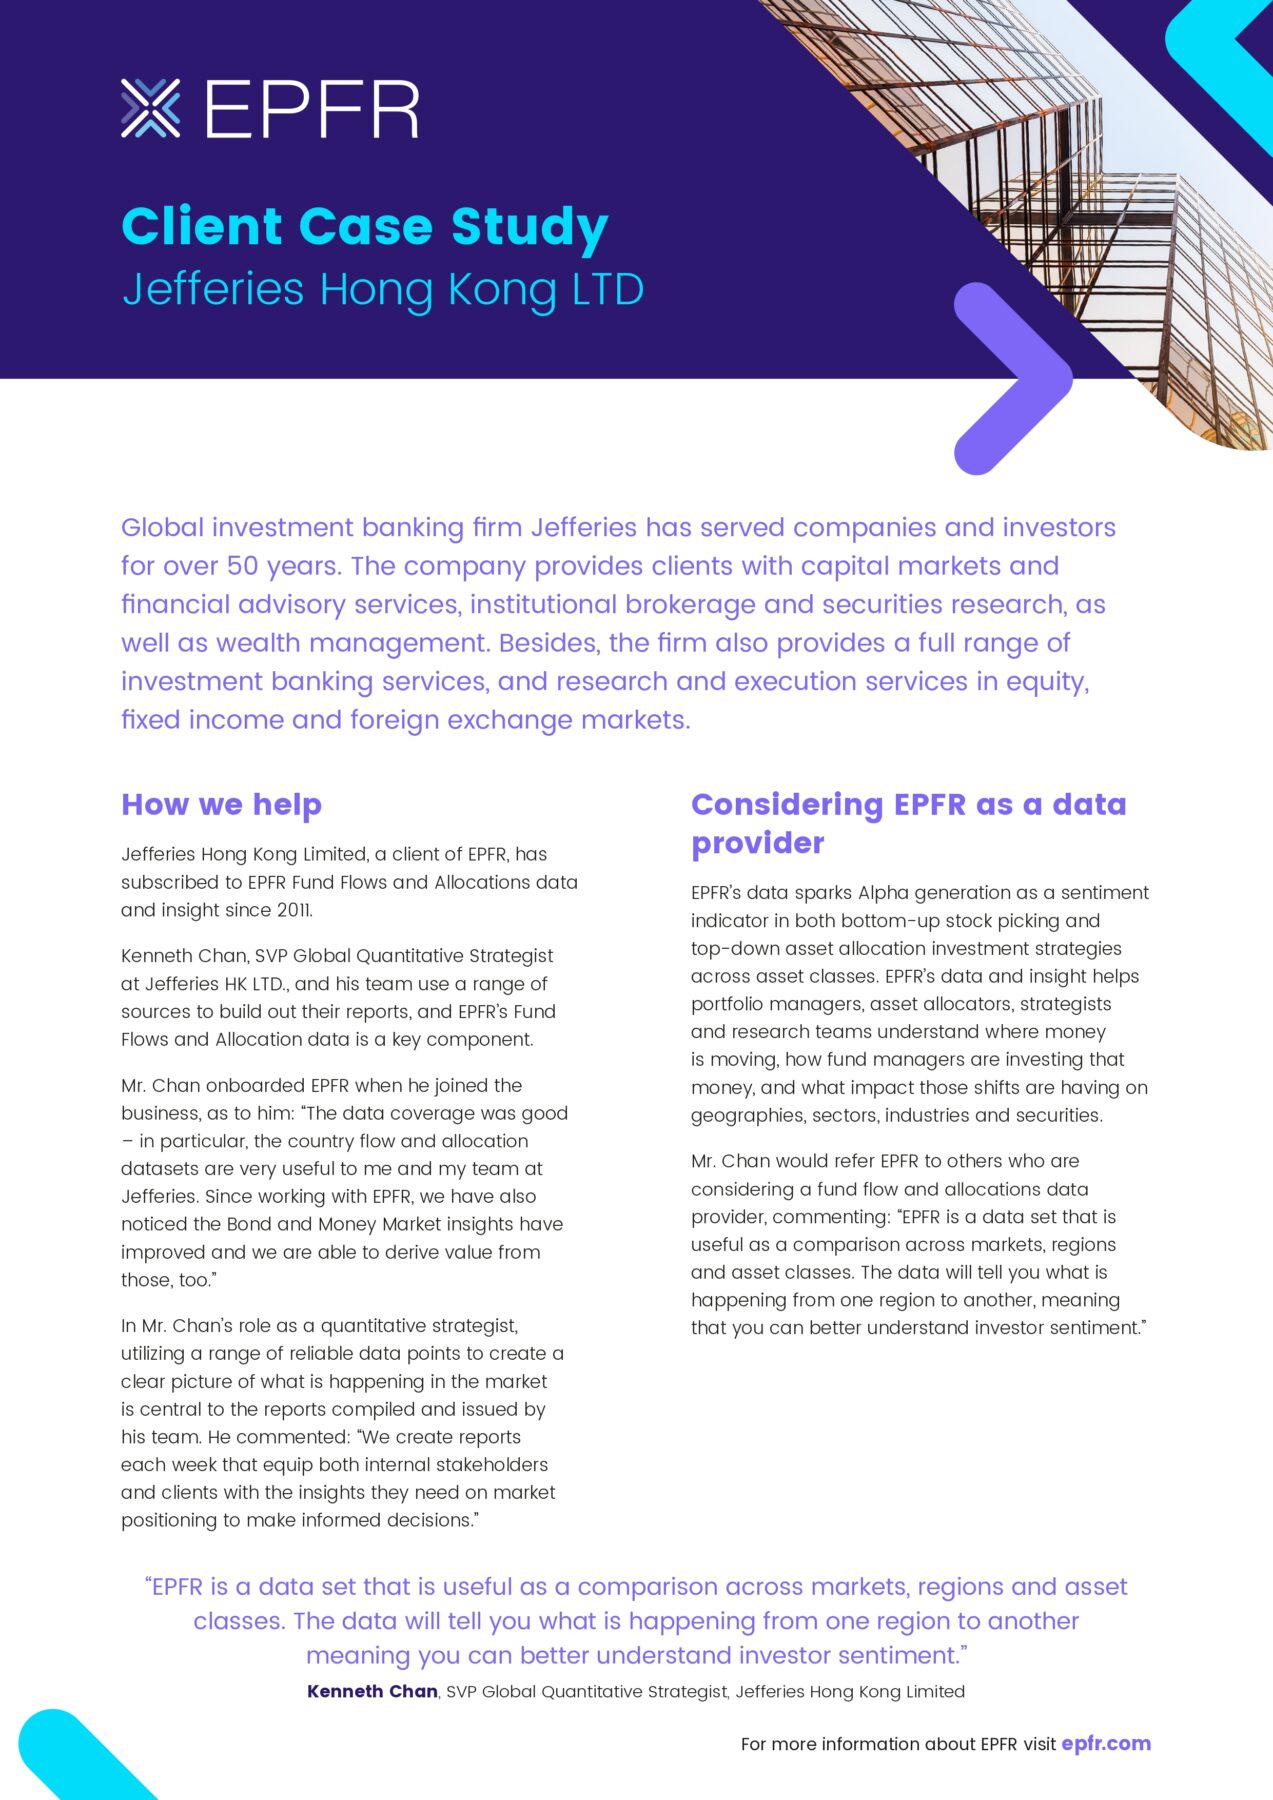 Image showing a preview of the EPFR Client Case Study - Jefferies Hong Kong